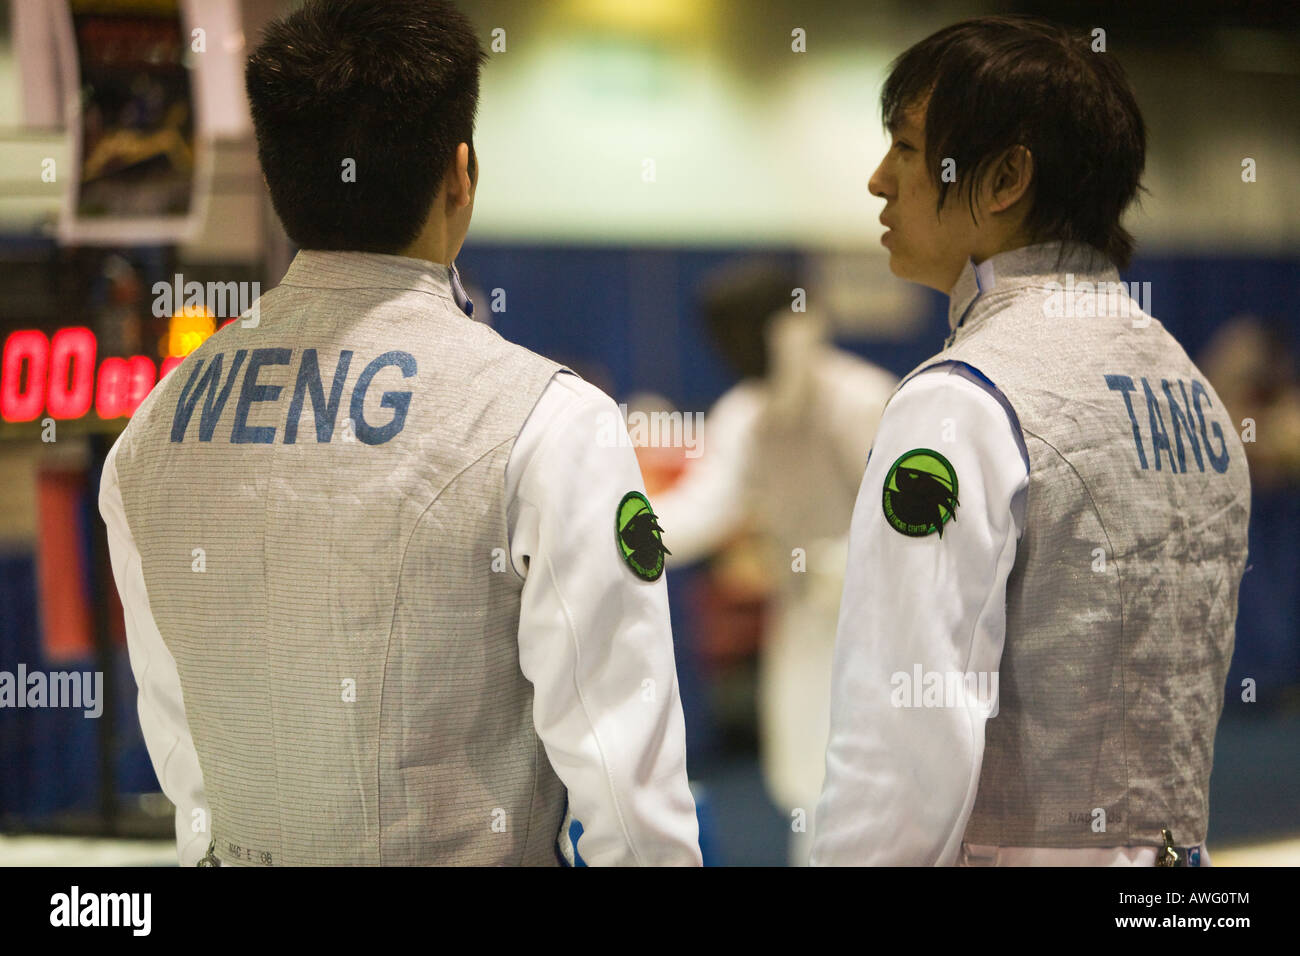 SPORTS Fencing competition two male foil competitors talking on strip prior to match names stenciled on backs Stock Photo